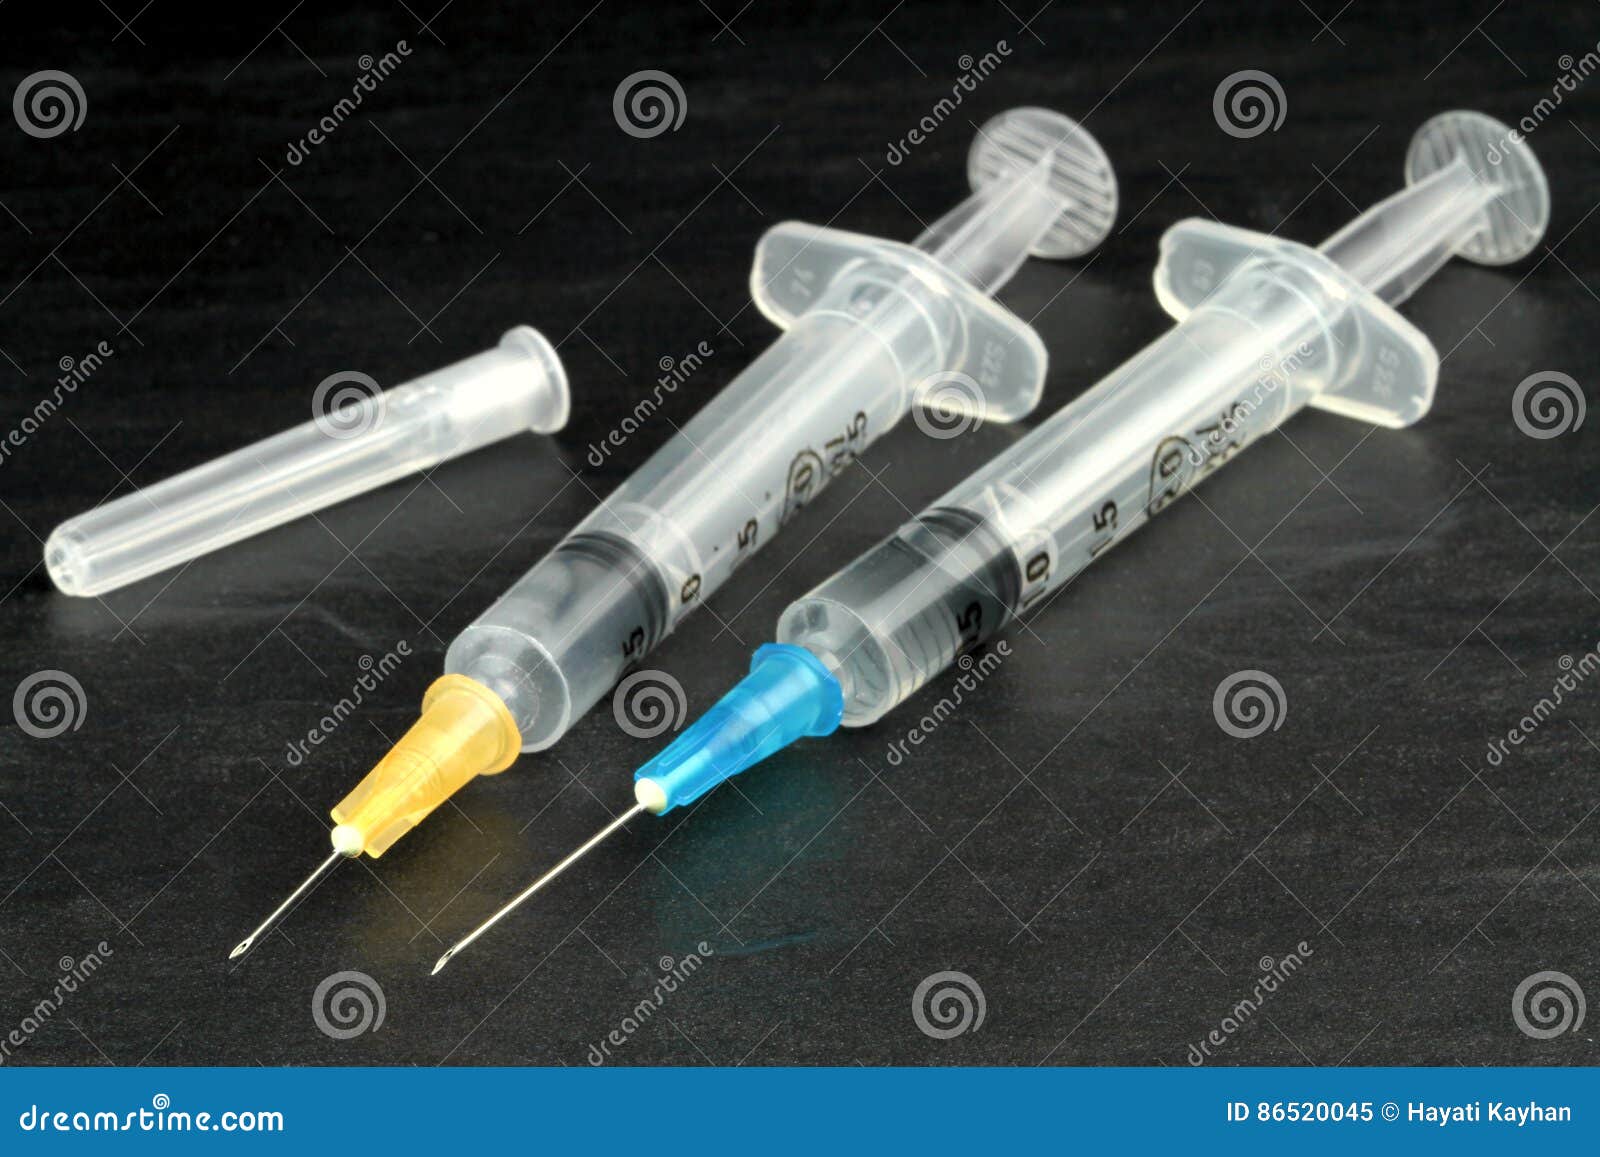 The Syringe with Long Needle and Medical Vial on Table. Black and